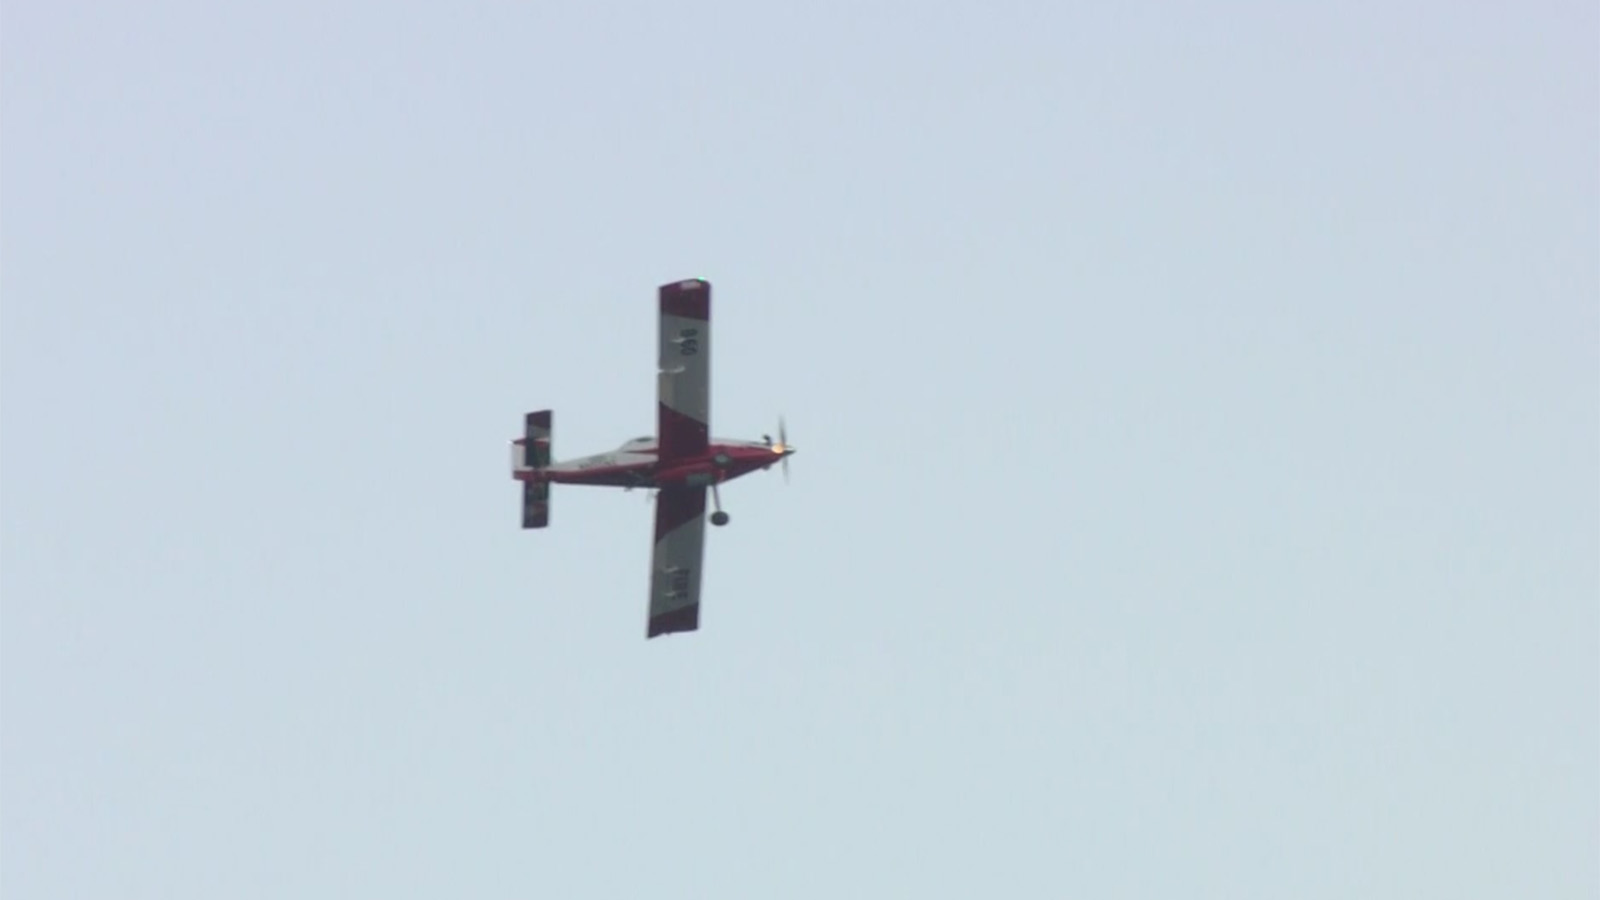 This is the single-engine Air Tractor AT-802 that crashed responding to the Kruger Rock Fire Tuesday.